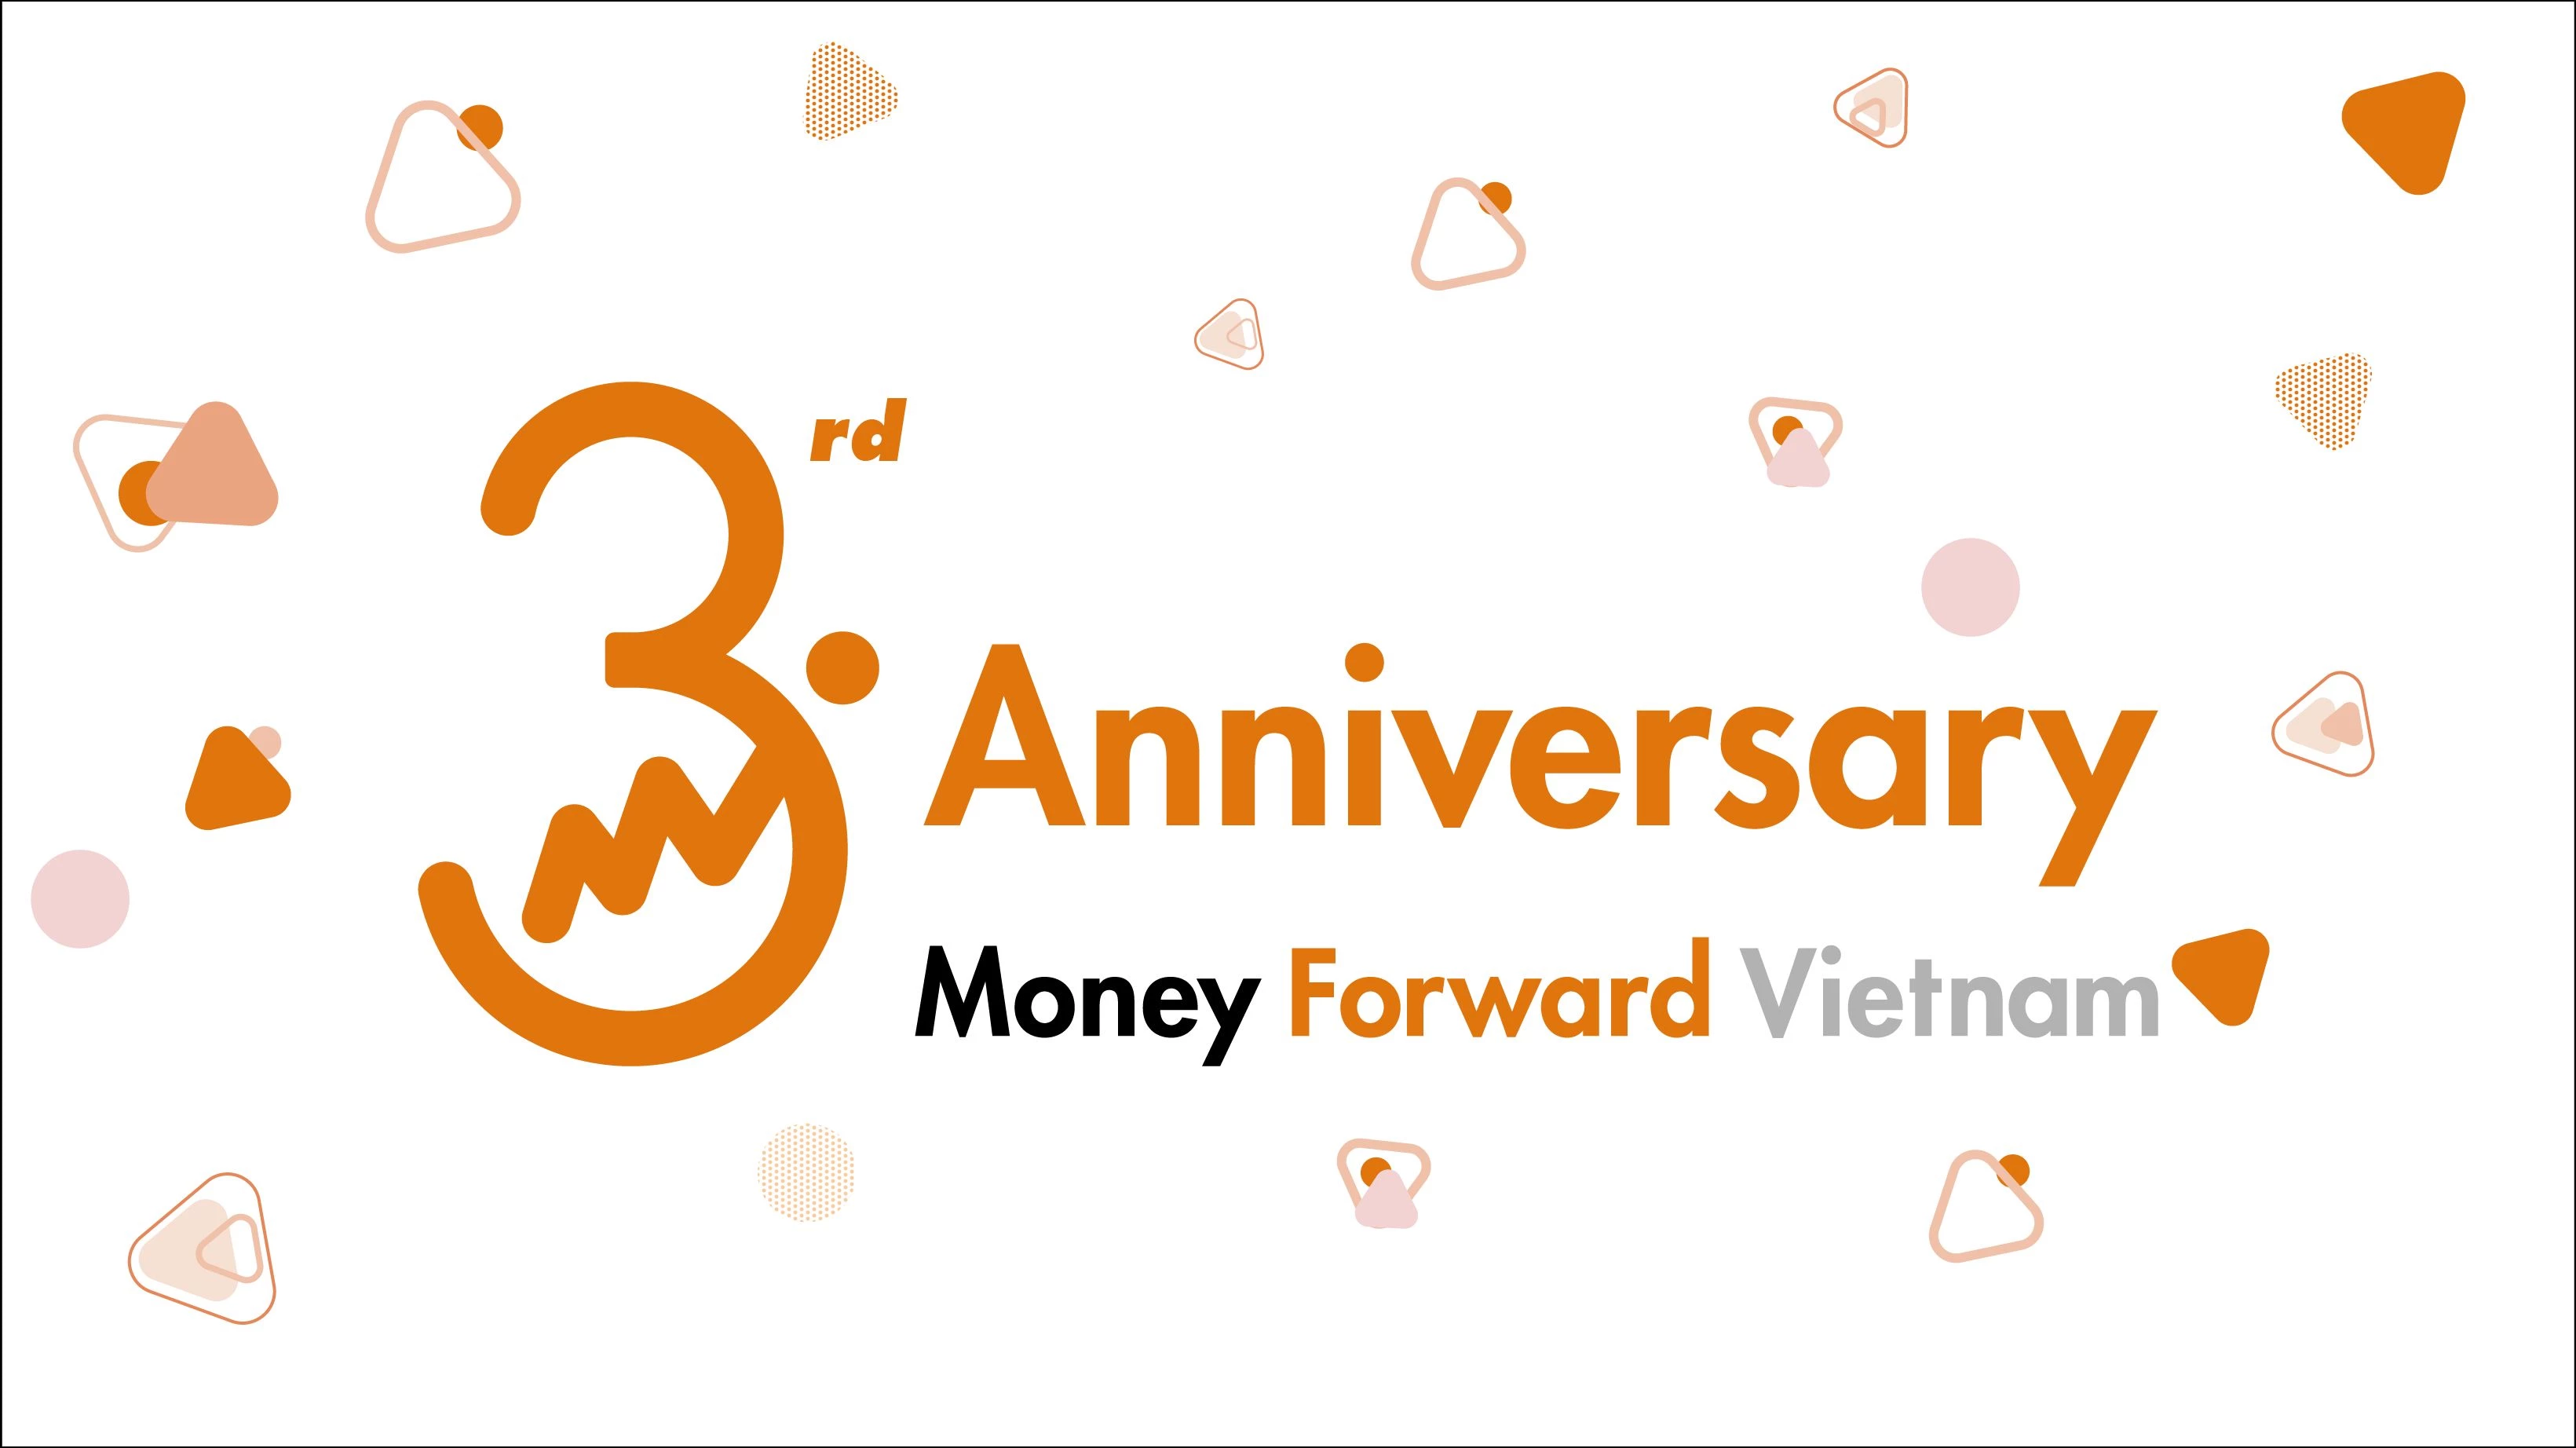 MONEY FORWARD VIETNAM - 3RD ANNIVERSARY - MESSAGES FOR THE NEW CHAPTER